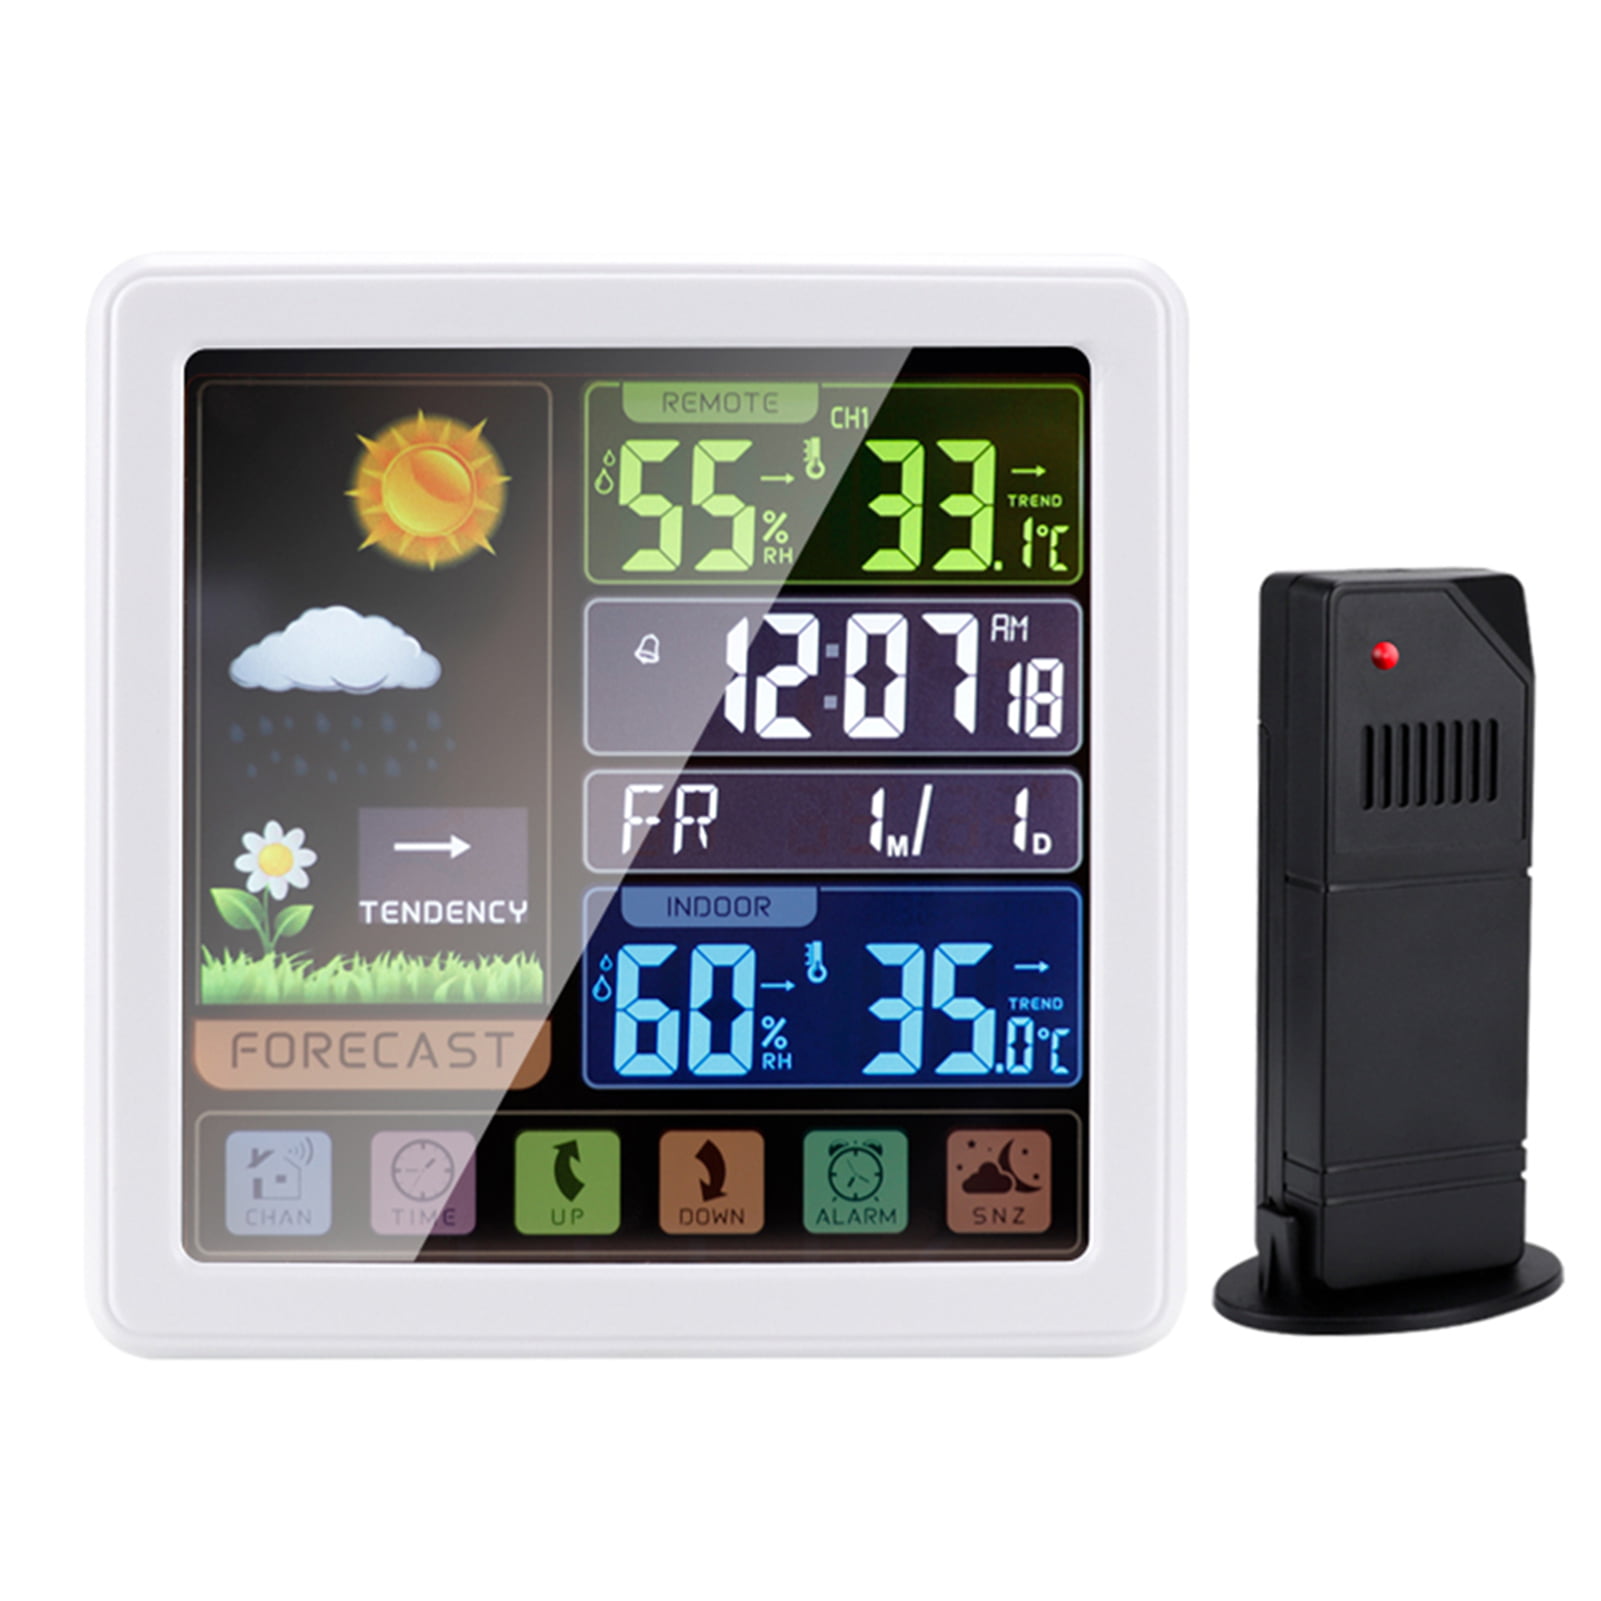 Digital LCD Thermometer Clock Indoor Temperature Weather Station Multitool Alarm 